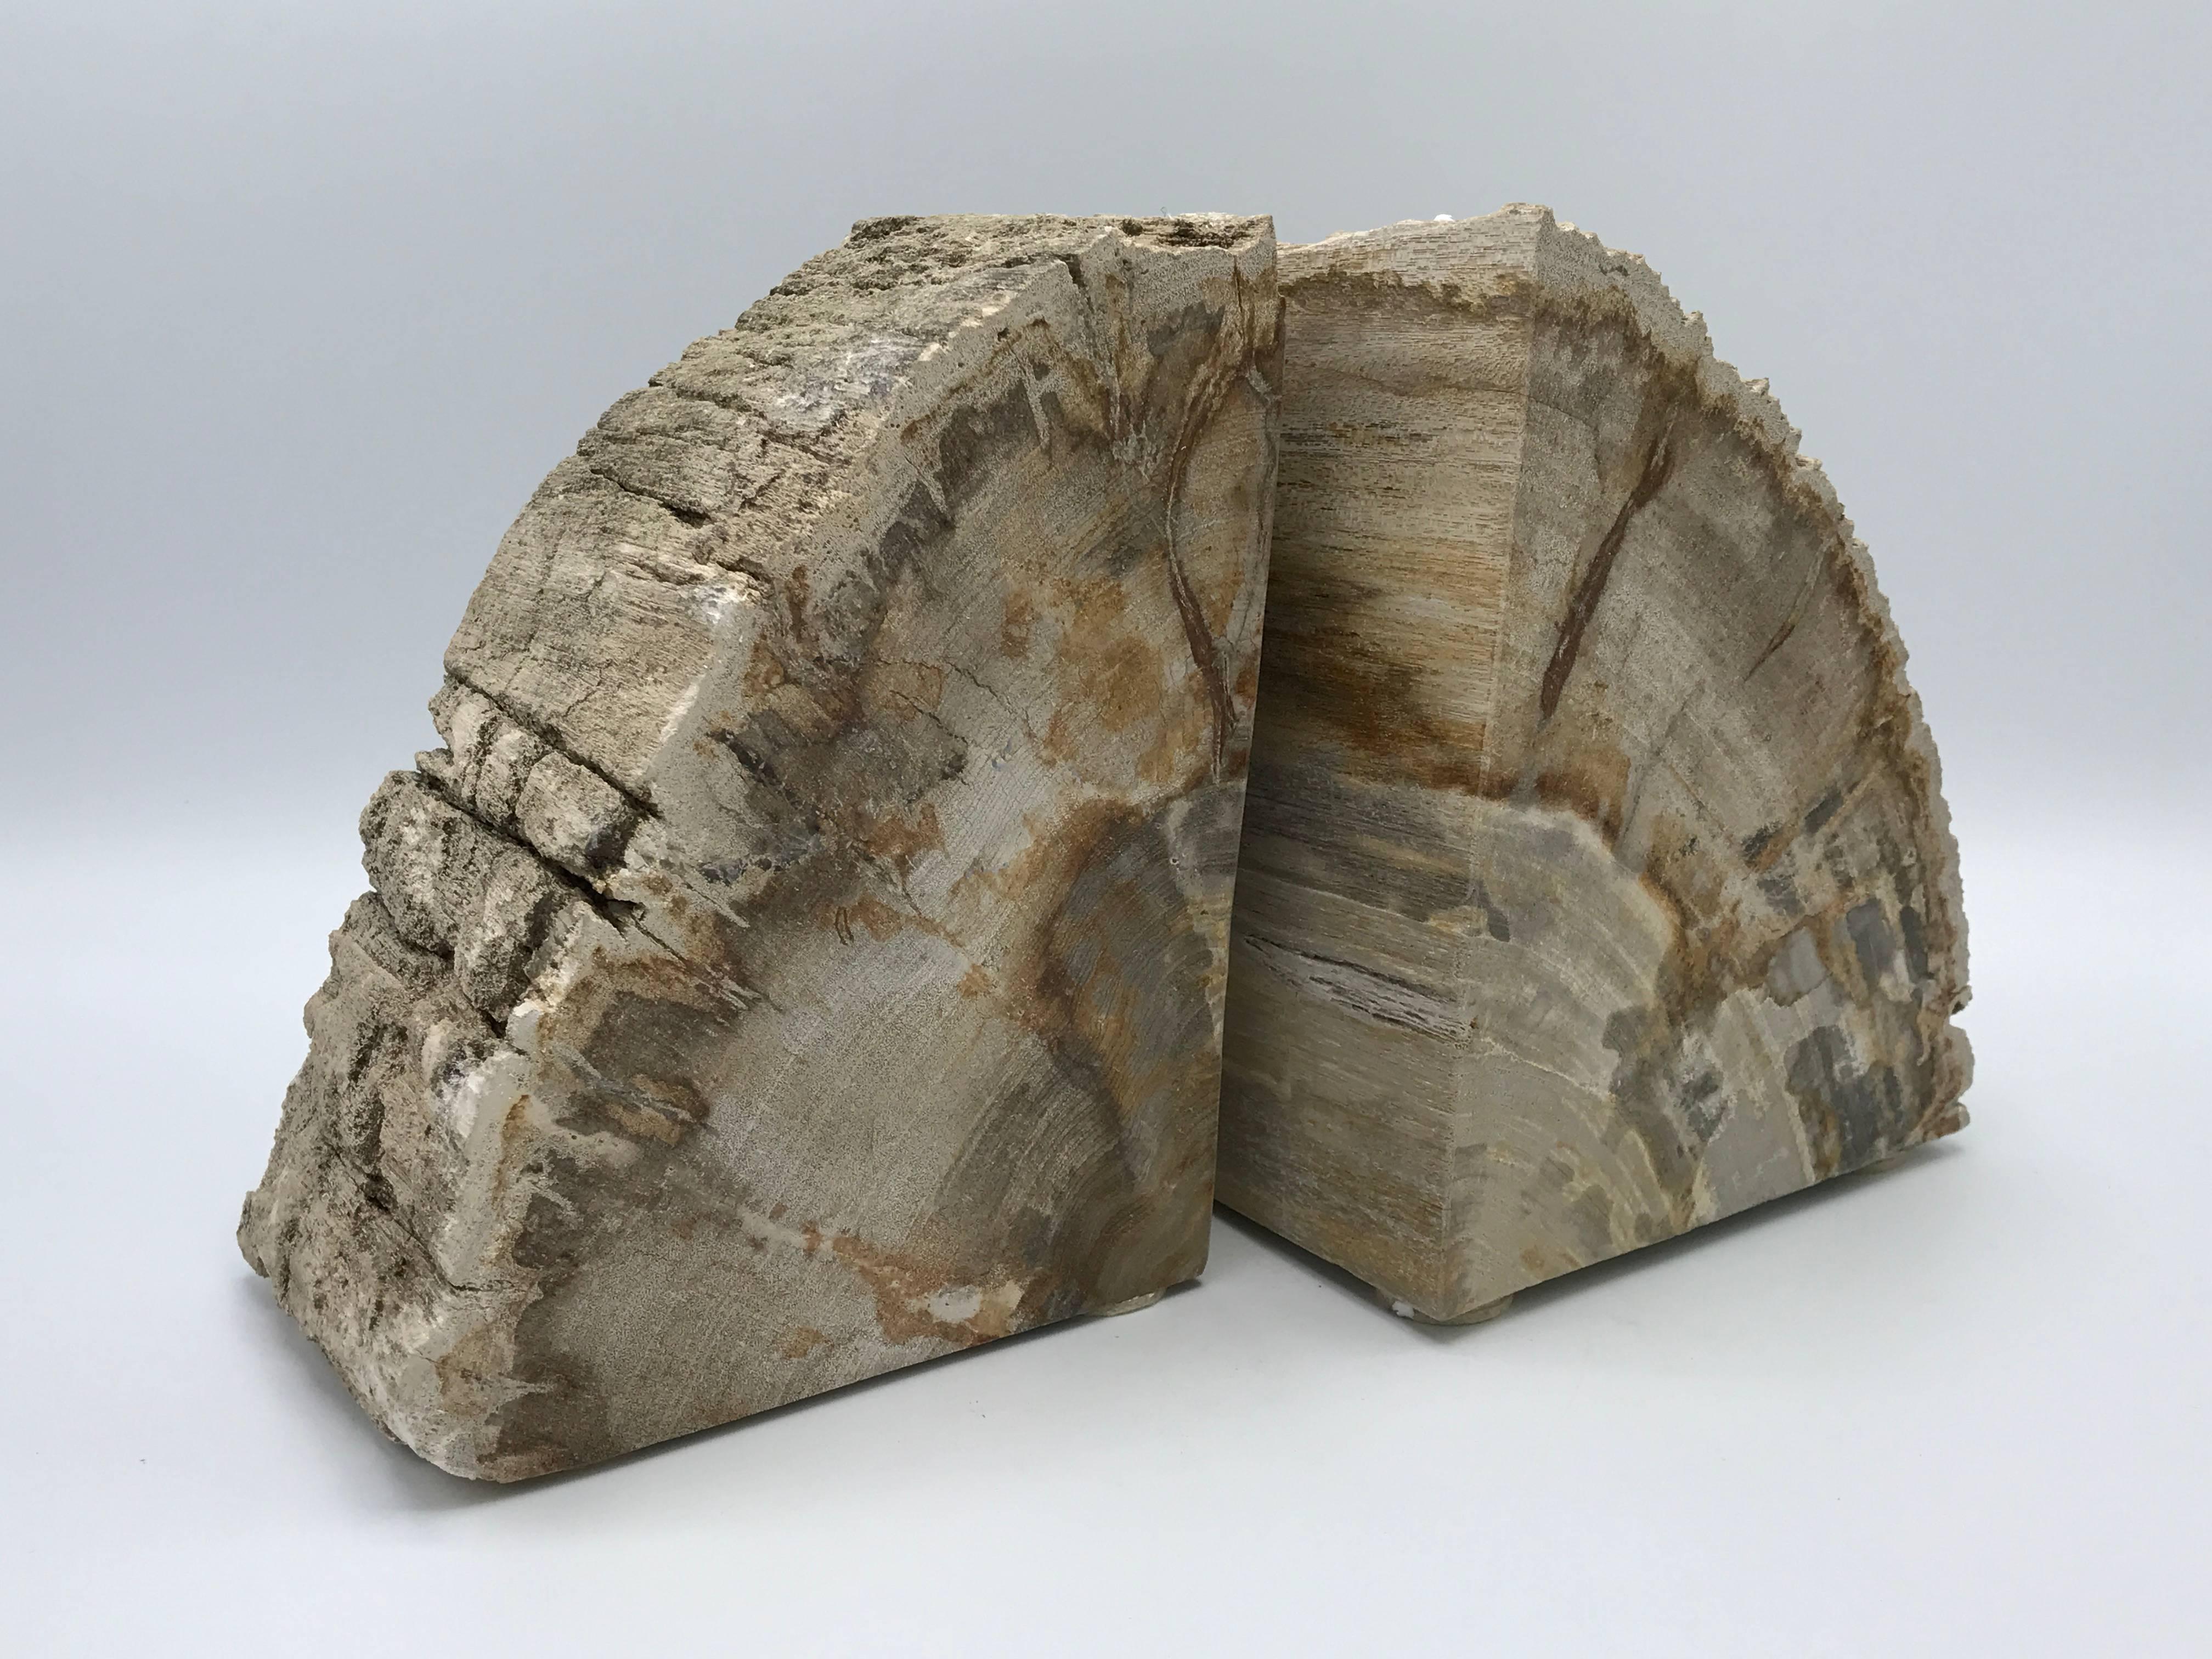 Offered is a stunning pair of 1950s petrified wood bookends. Approx. weight is 25ibs for the pair, great for large books.